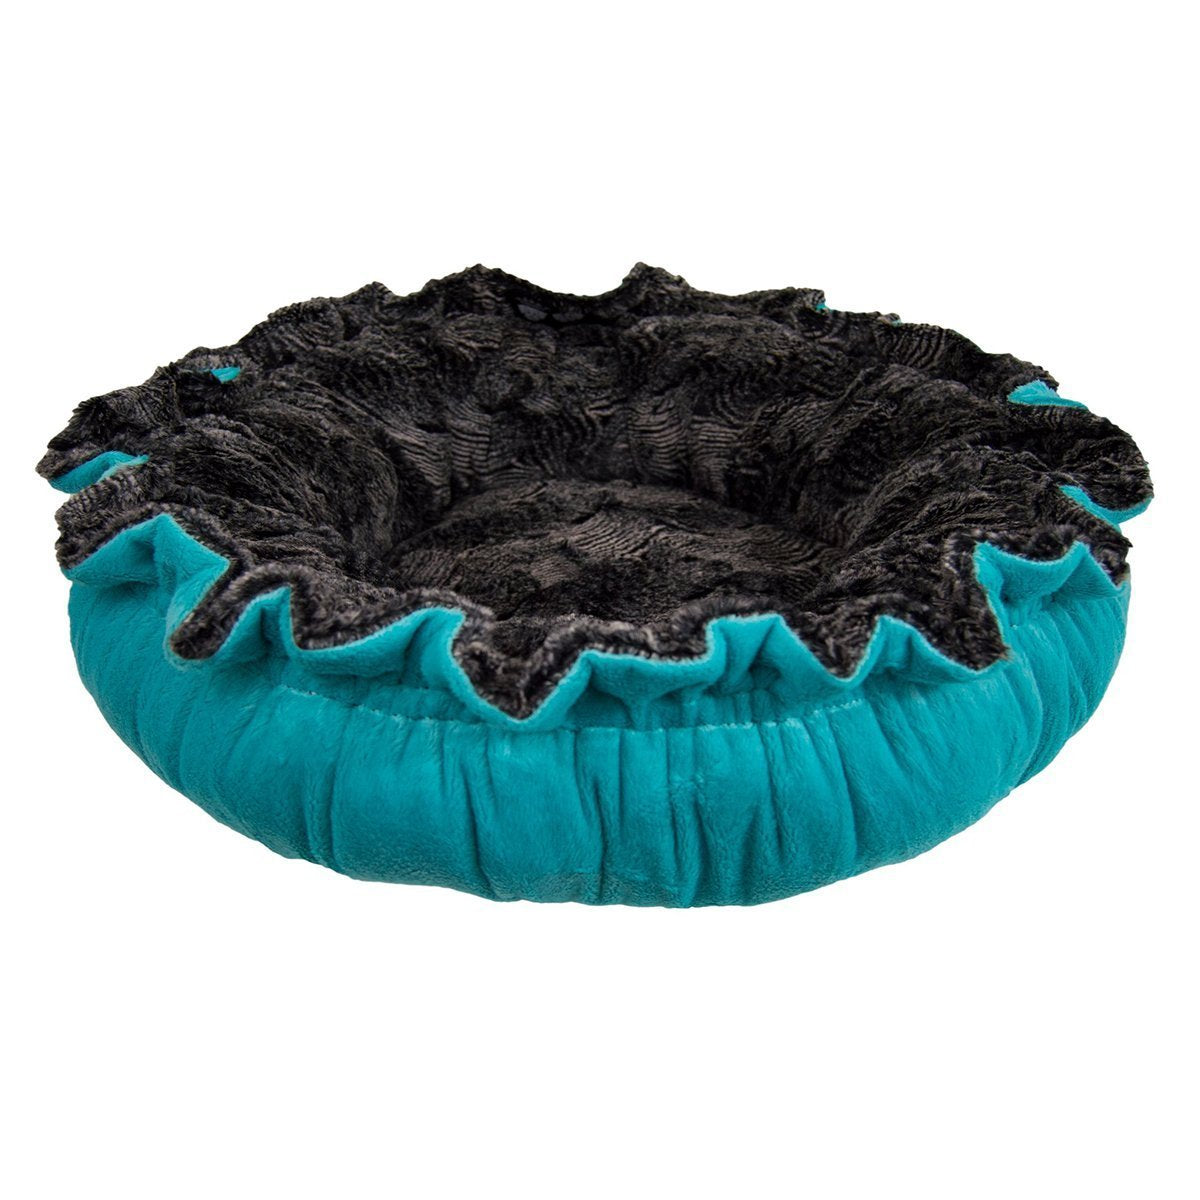 Latest Products 45.00 usd for Lily Pod Bed in Aquamarine Boutiques